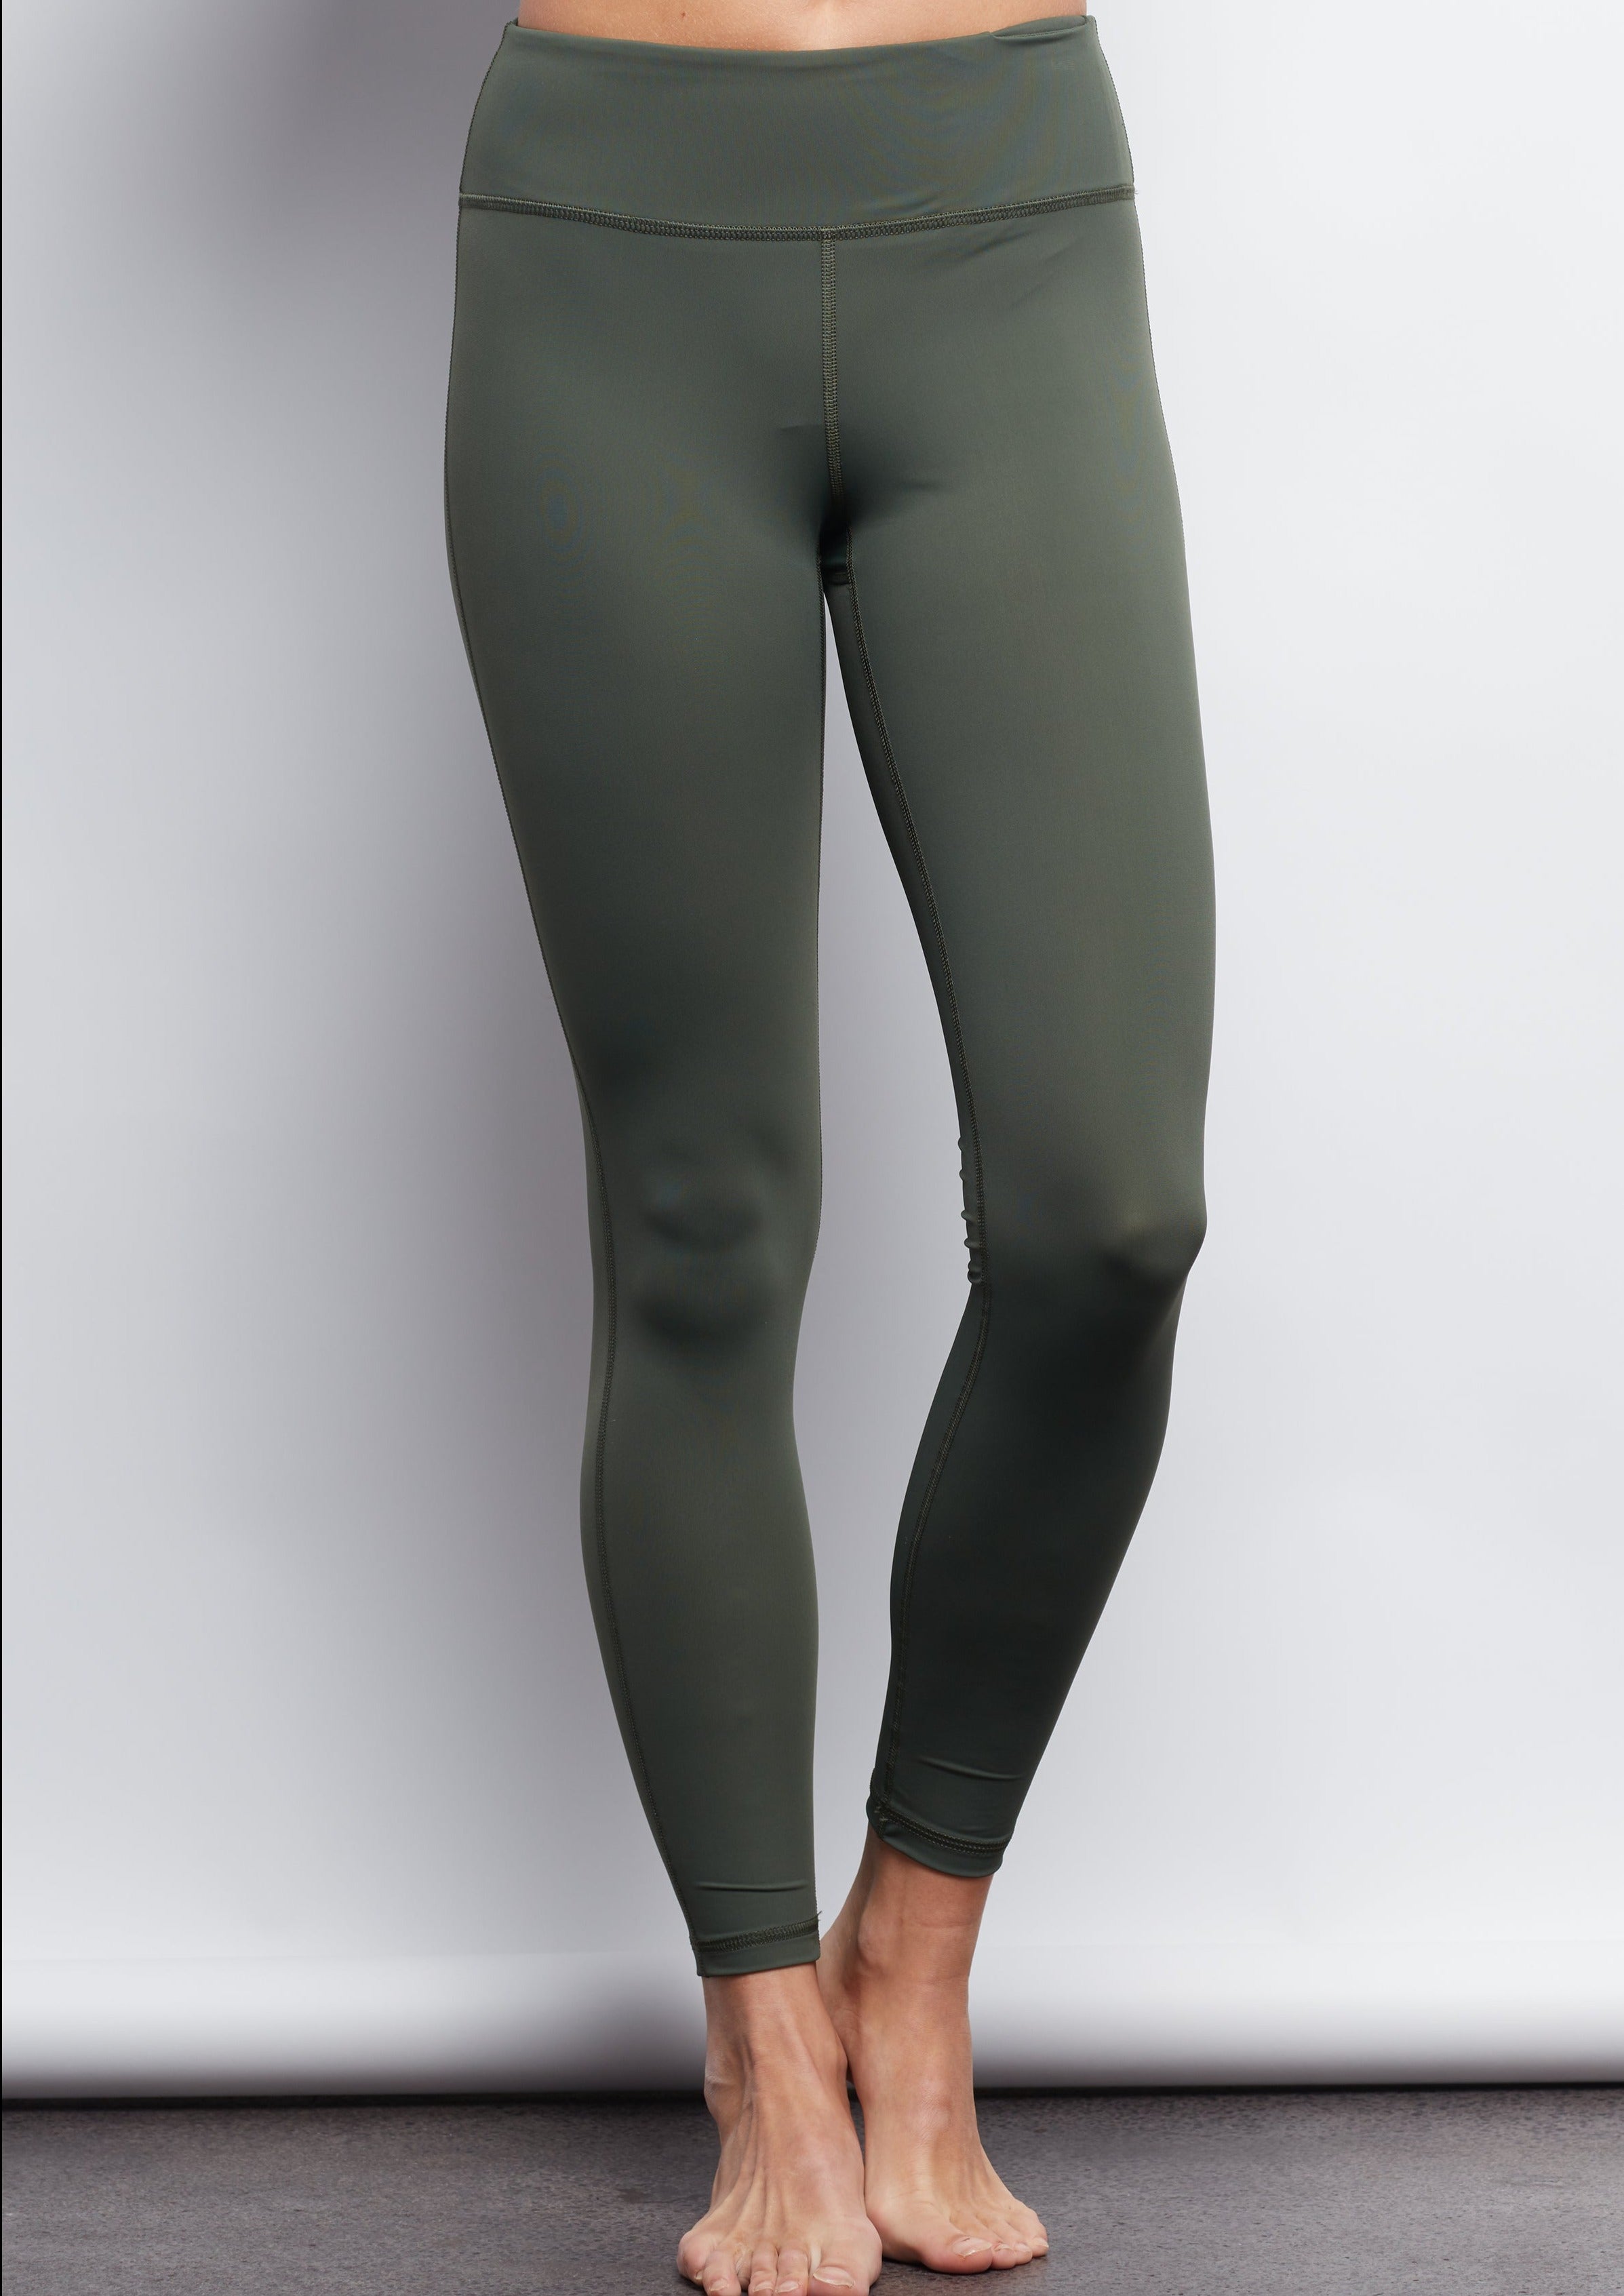 Sage Spandex Athletic Pants for Women